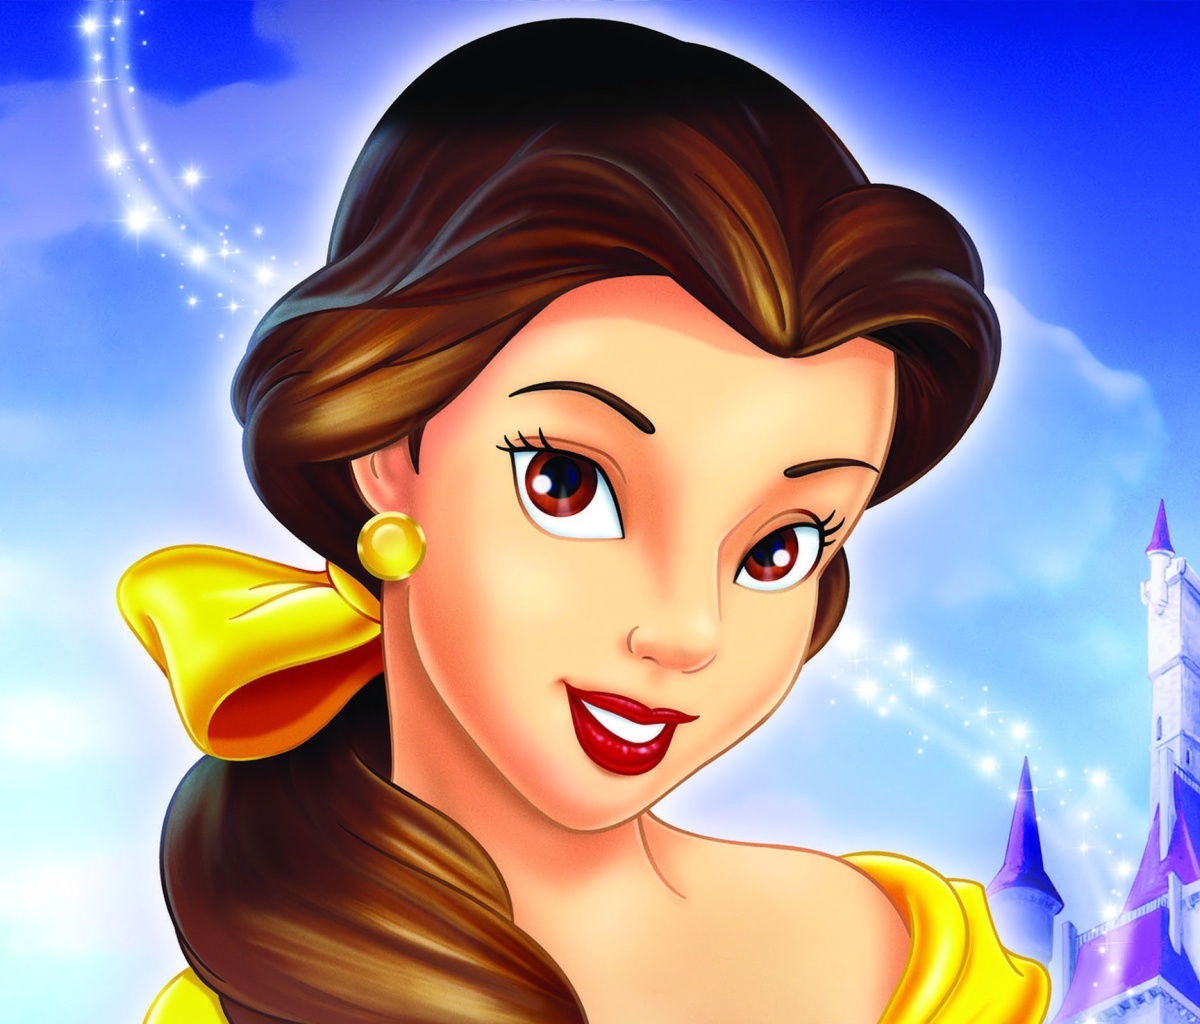 Beauty and the Beast Princess wallpaper 1200x1024